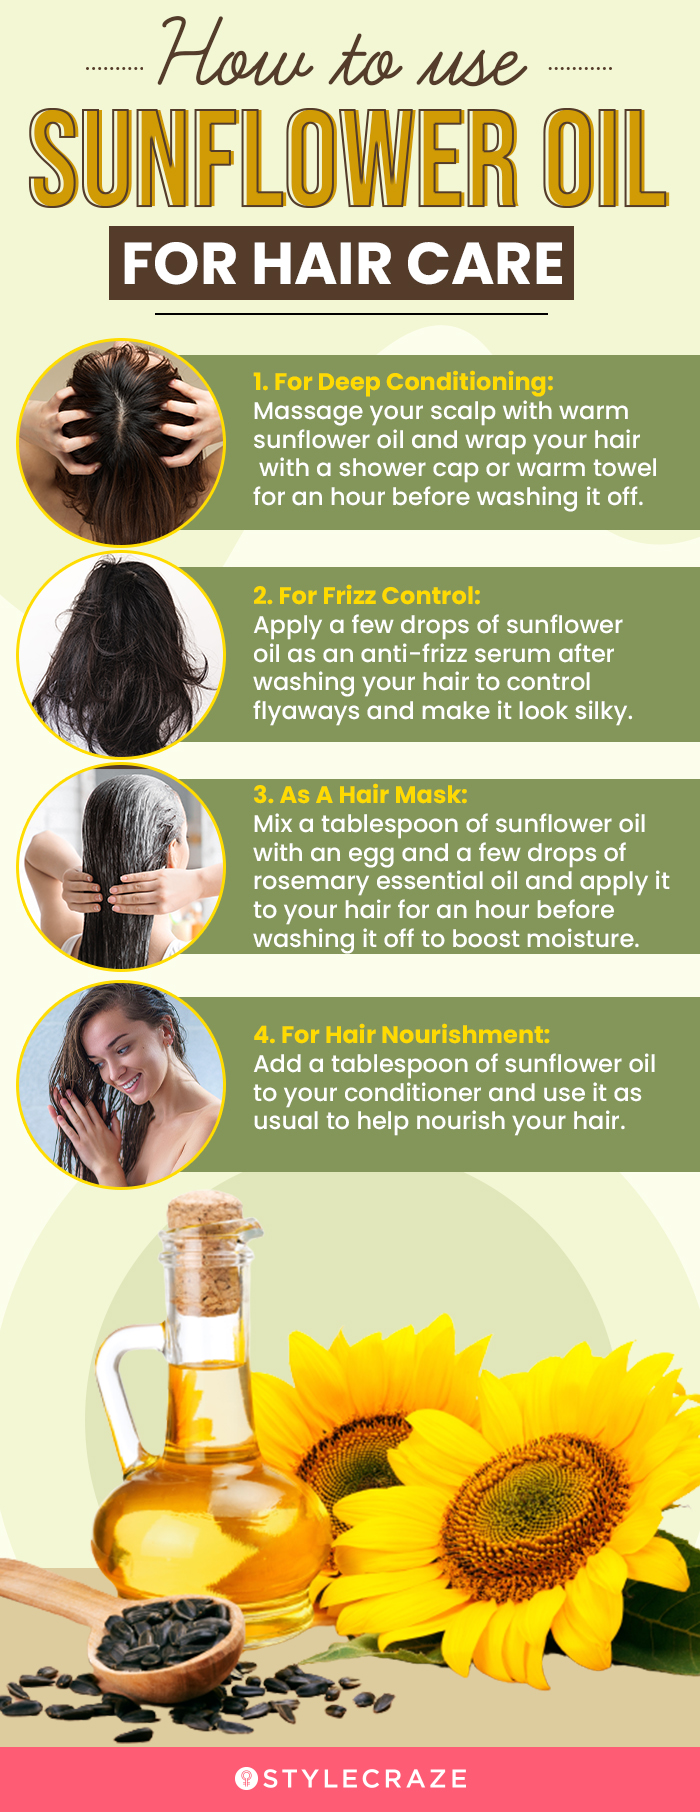 how to use sunflower oil for hair care (infographic)